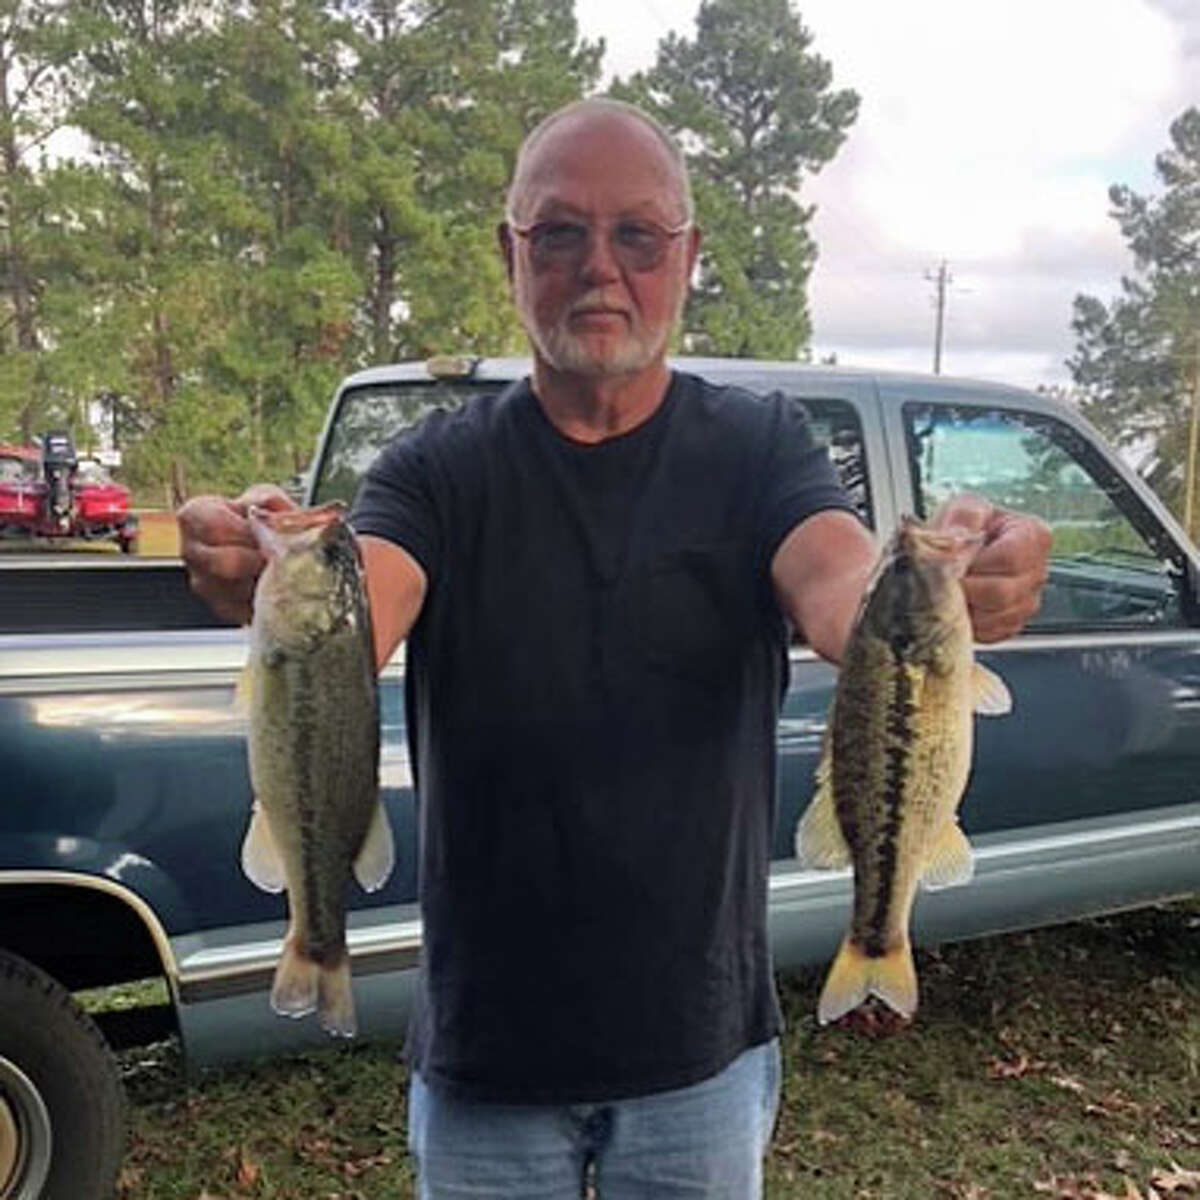 Glen Swihart won the Many Bass Club's June tournament on Toledo Bend with 11.37 pounds.